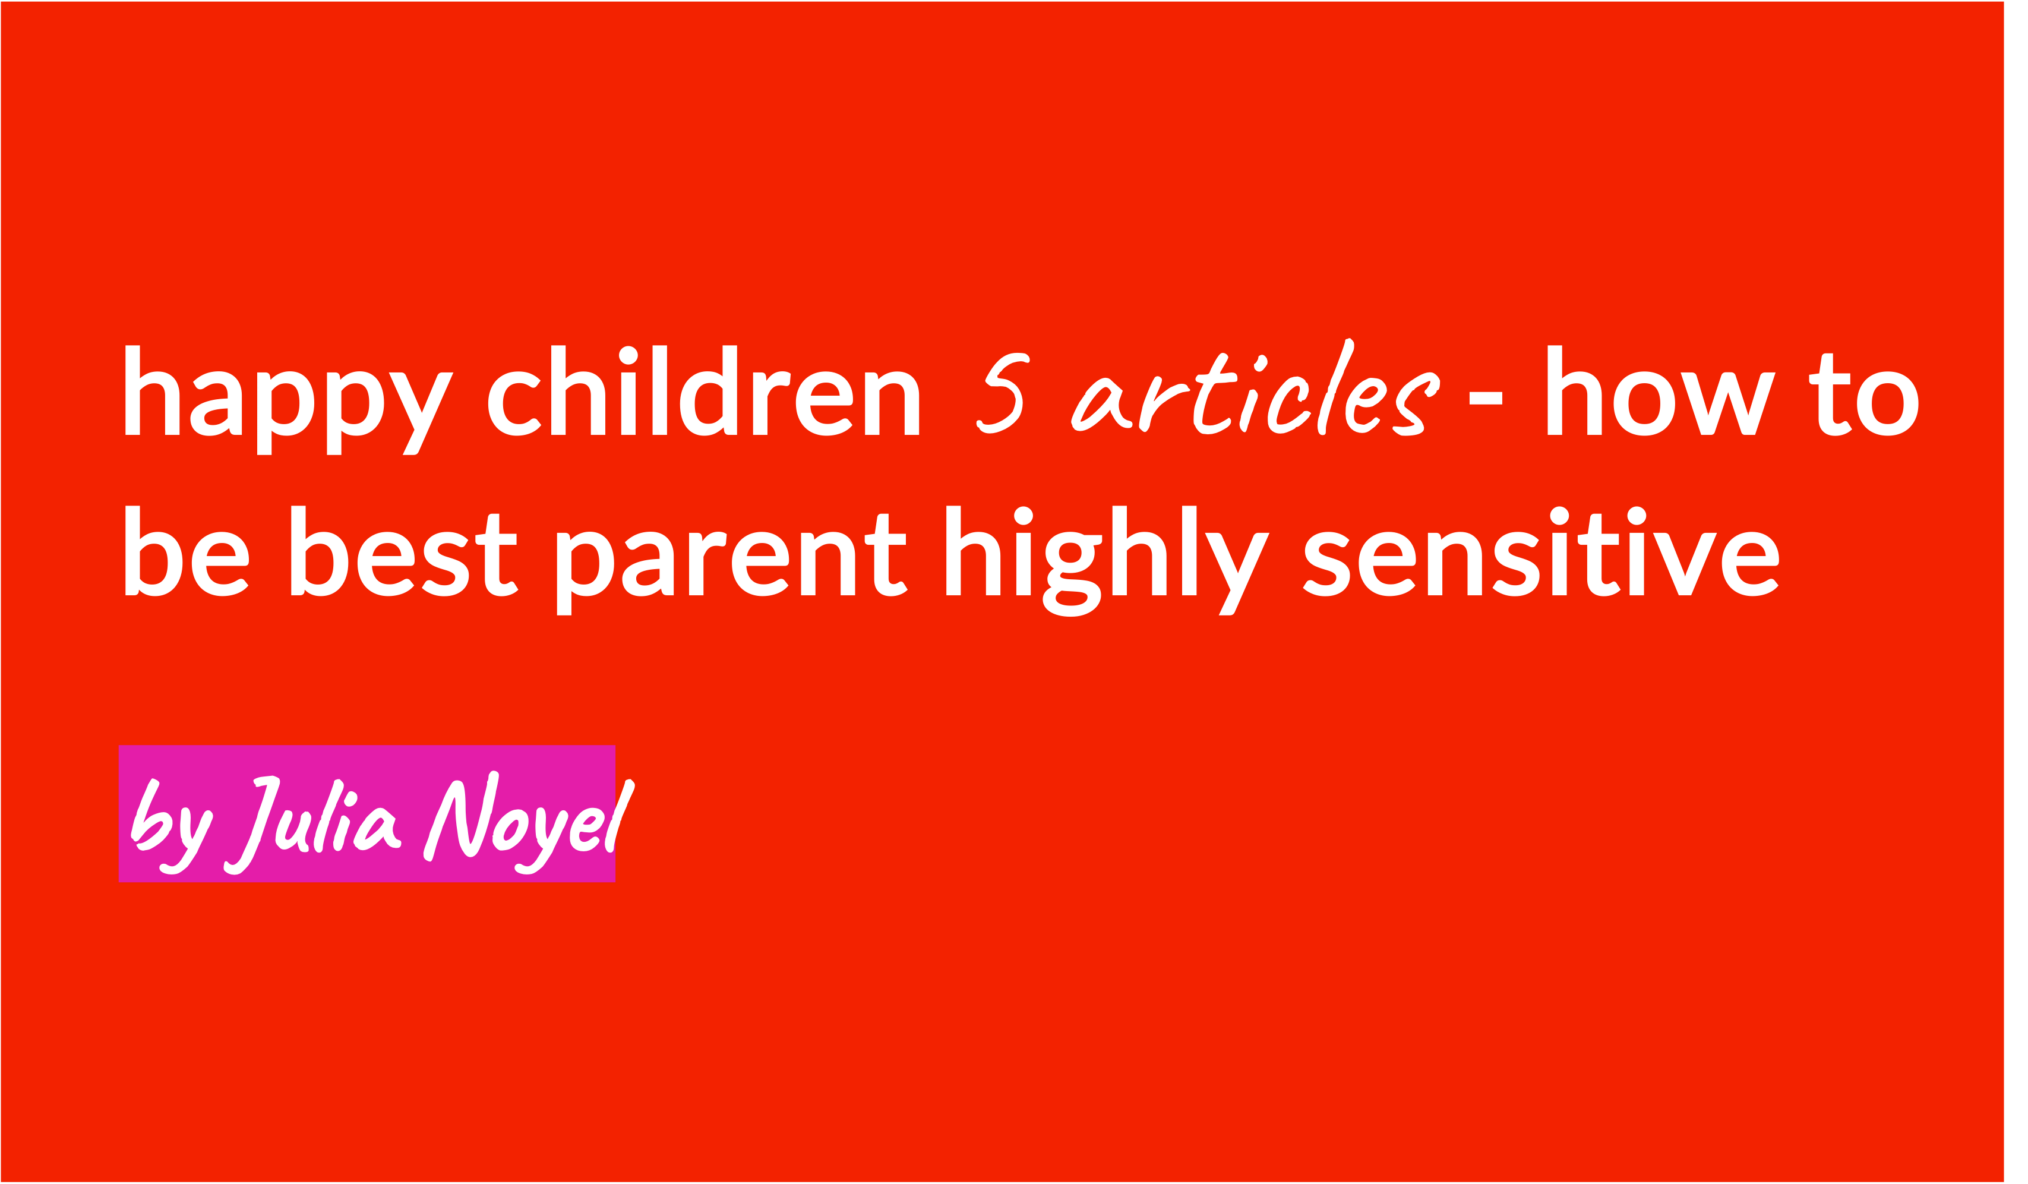 happy children 5 articles - how to be best parent highly sensitive by Julia Noyel